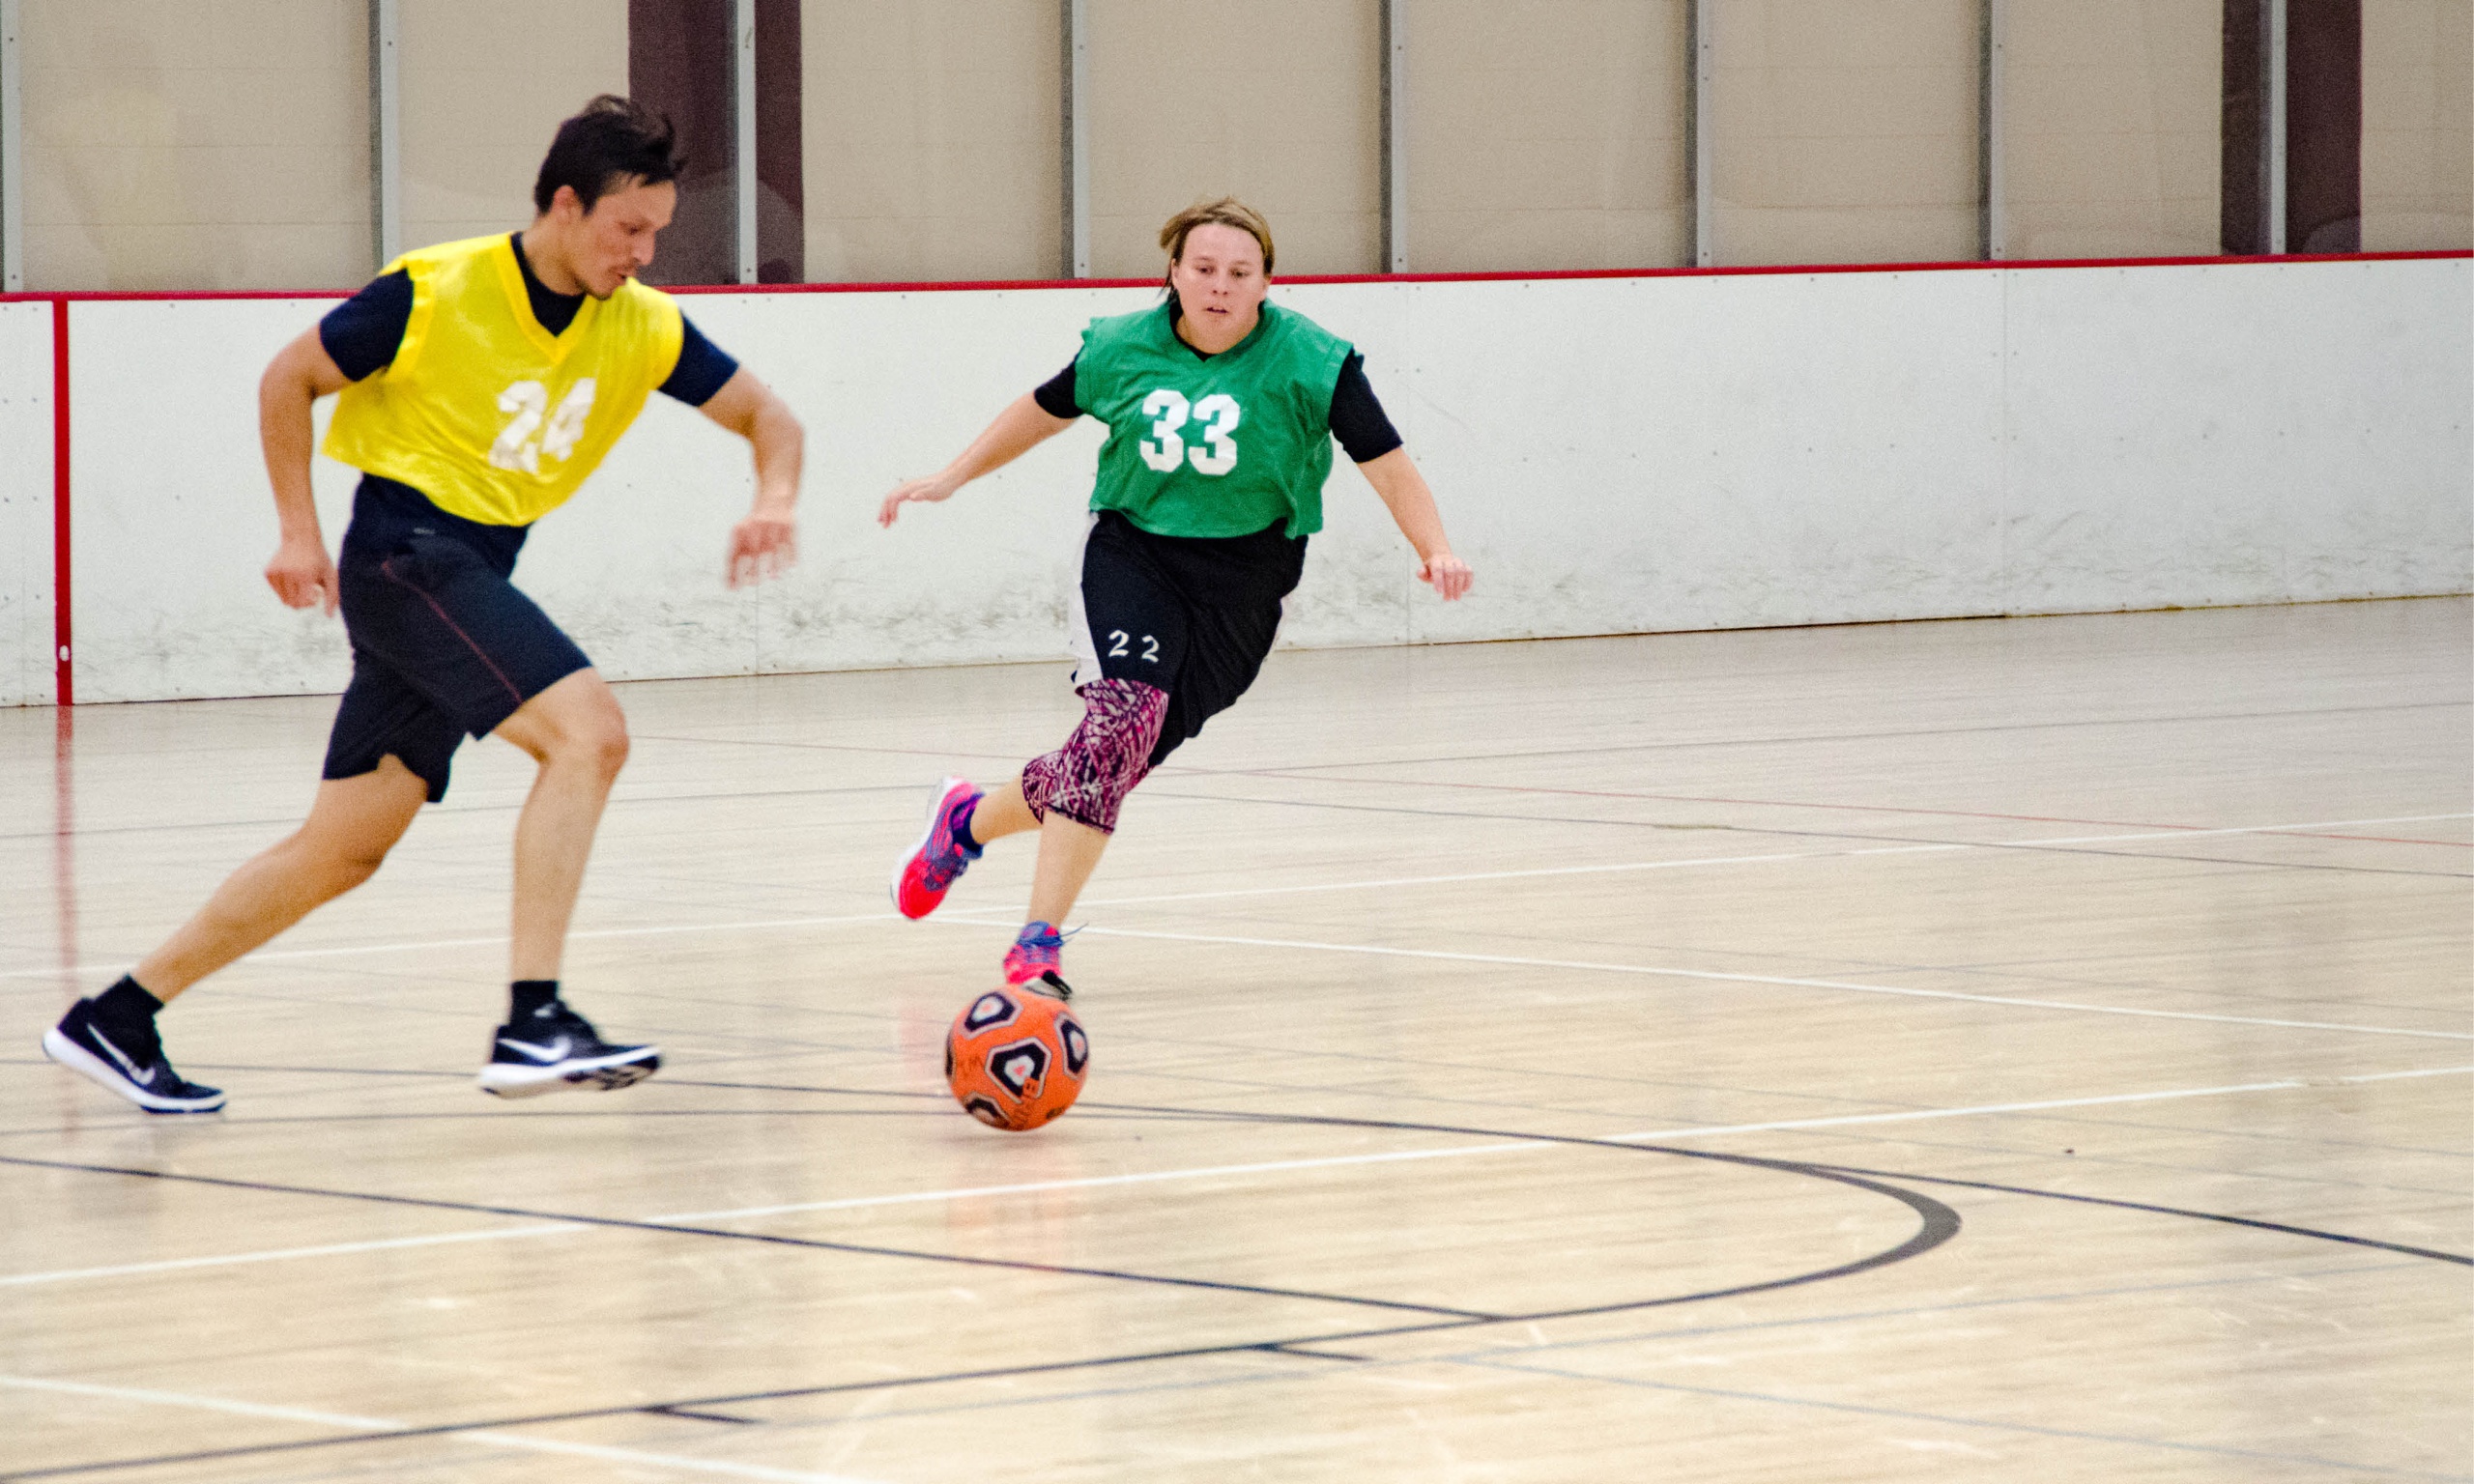 A pair of individuals actively participating in an intramural coed soccer match on a court, showcasing their passion for the game.